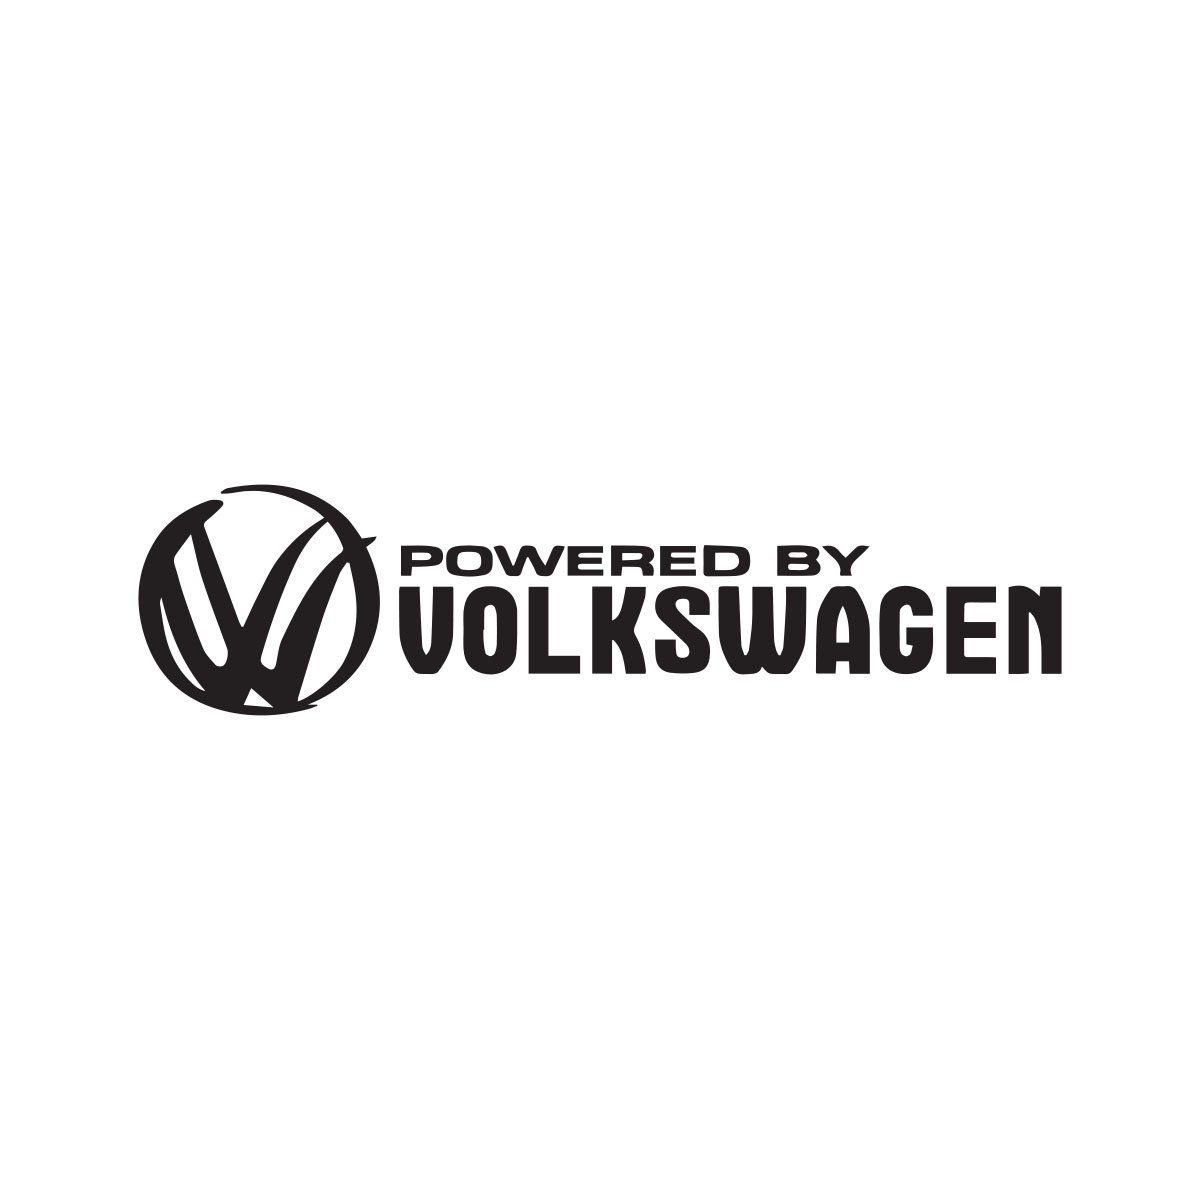 powered by volkswagon